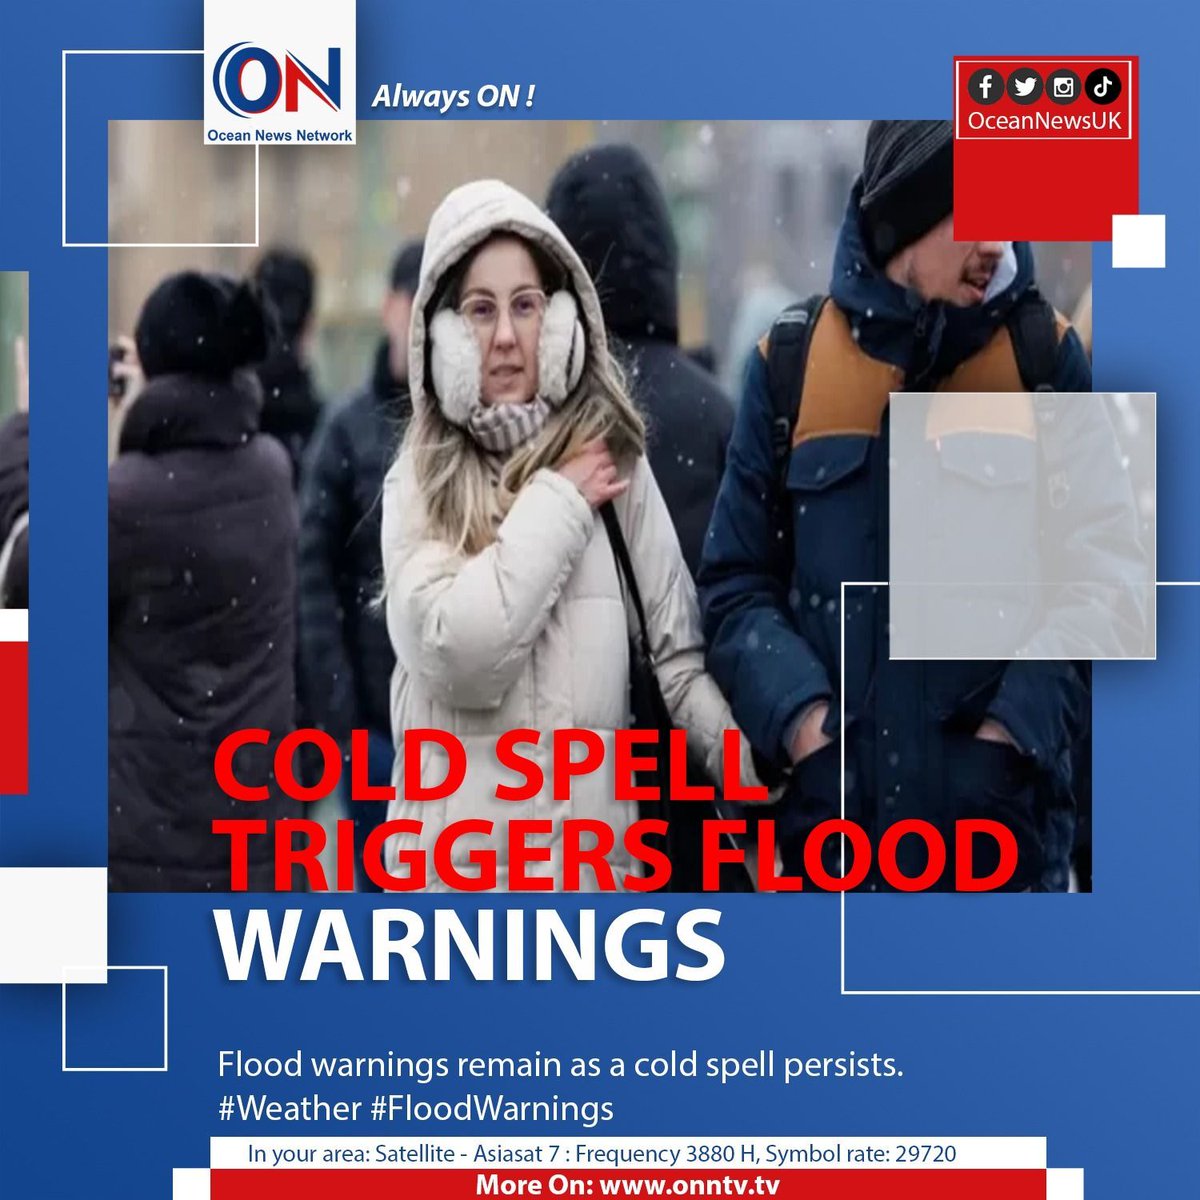 Flood warnings remain as a cold spell persists. #Weather #FloodWarnings 

#OceanNewsUK #UK #Ocean #breaking #latest #London

More On: oceannewsuk.com

📺 Satellite - Asiasat7 : Frequency 3880 H, Symbol Rate: 29720